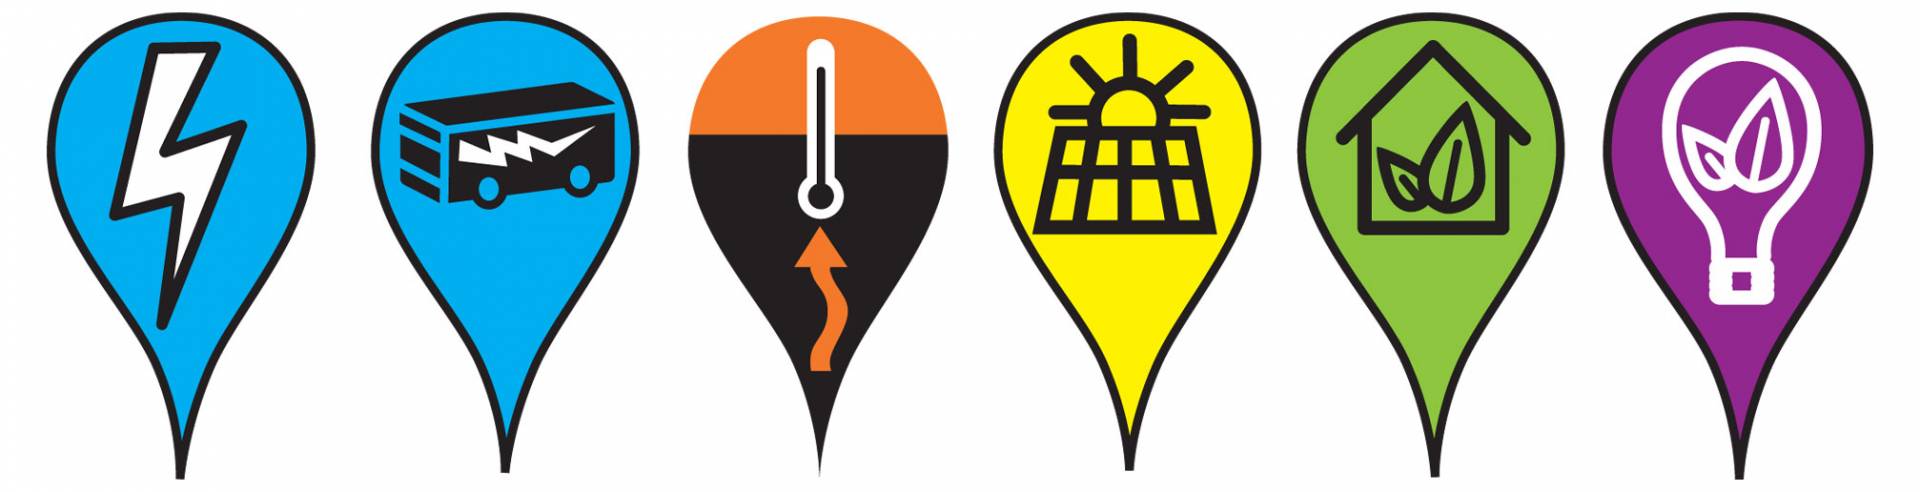 Mapmarkers with lightning, an electrified bus, a thermometer, solar panel, a house with leaves, a light bulb with a leaf inside